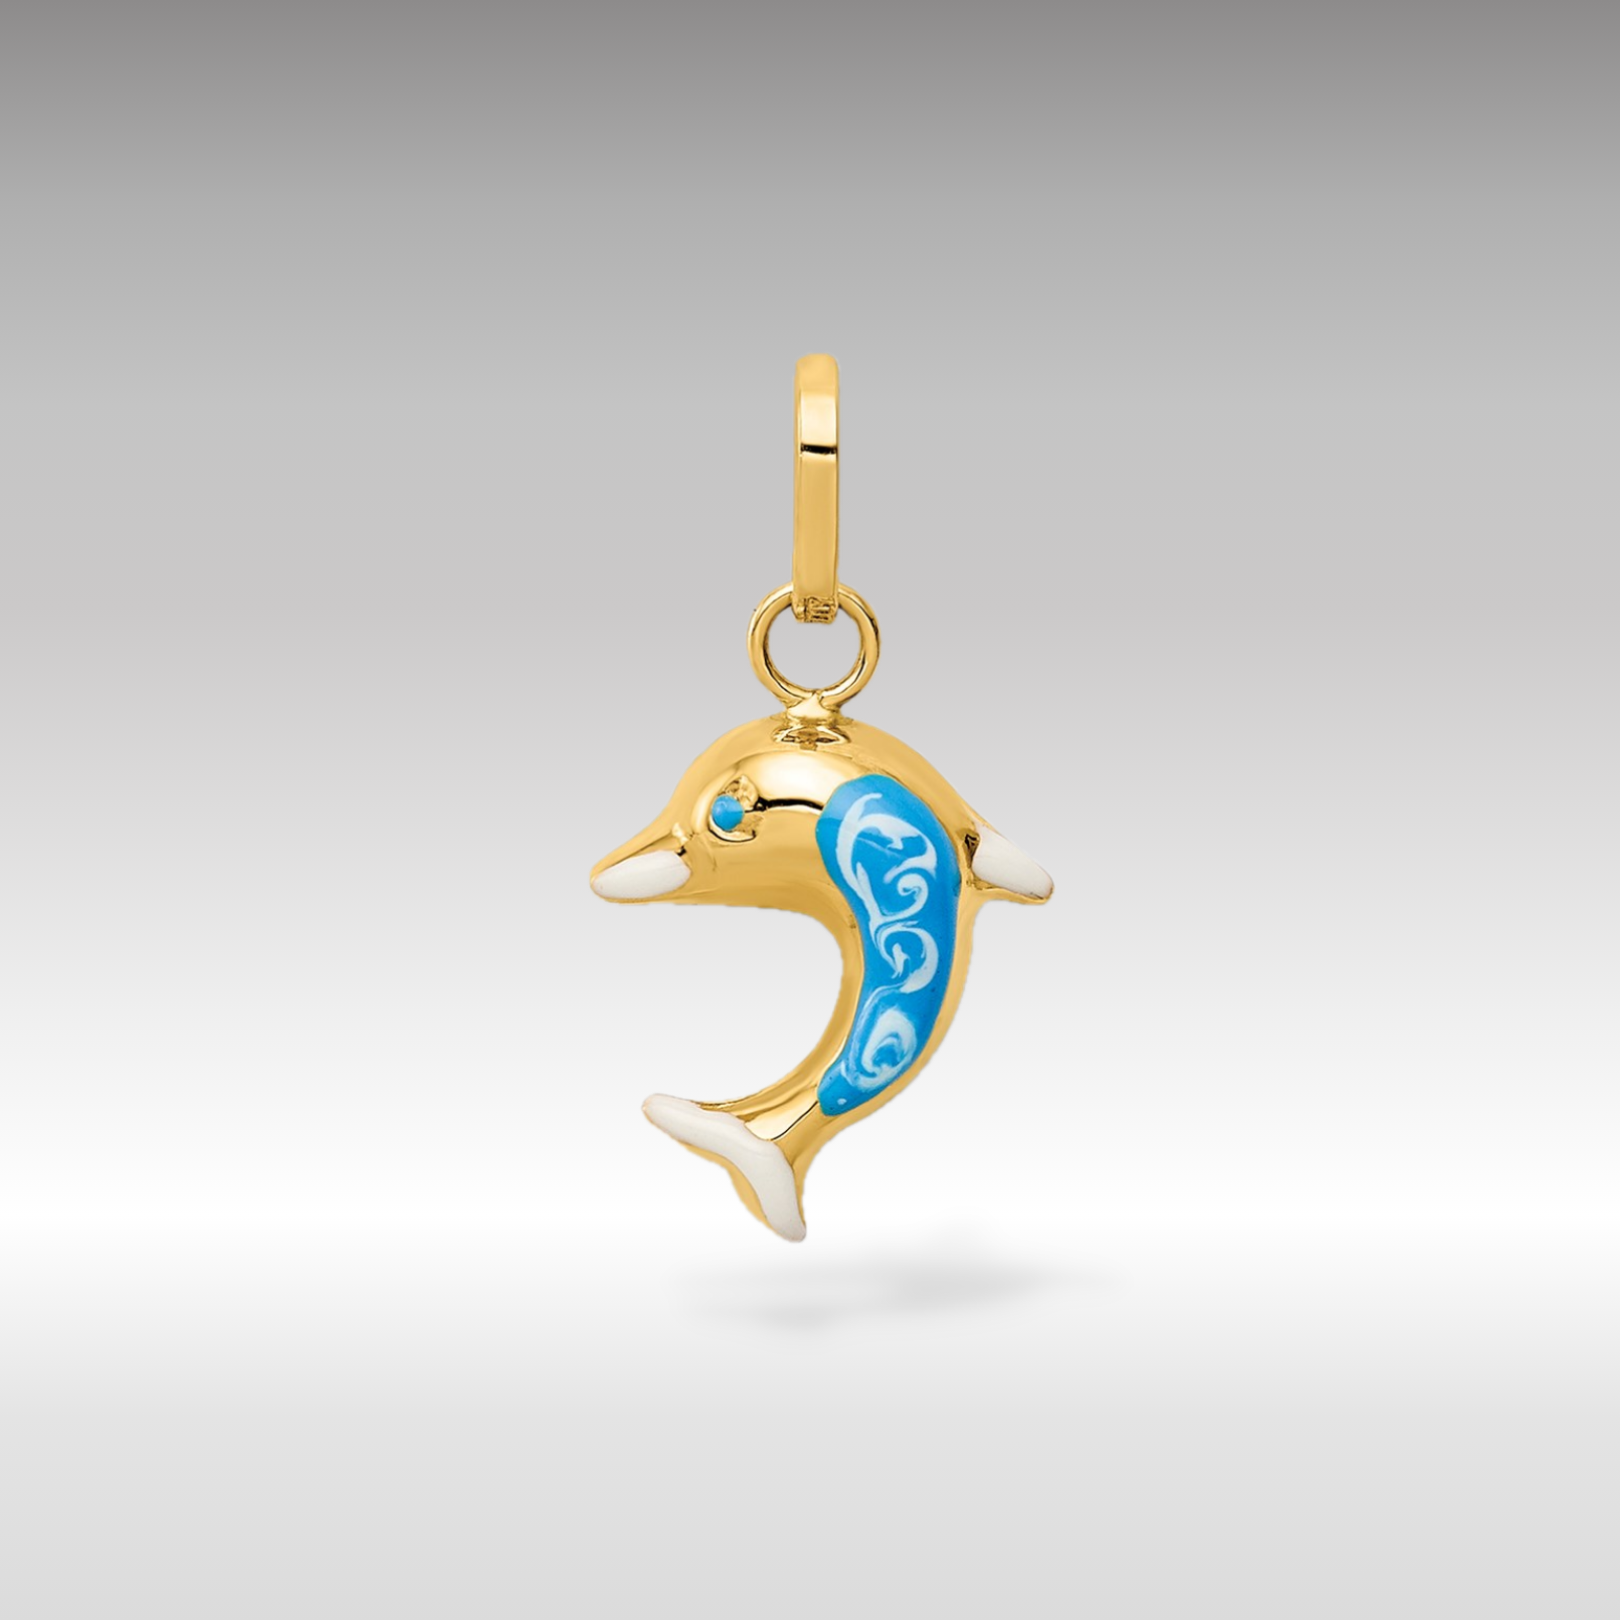 14K Gold Enameled Dolphin Charm - Charlie & Co. Jewelry